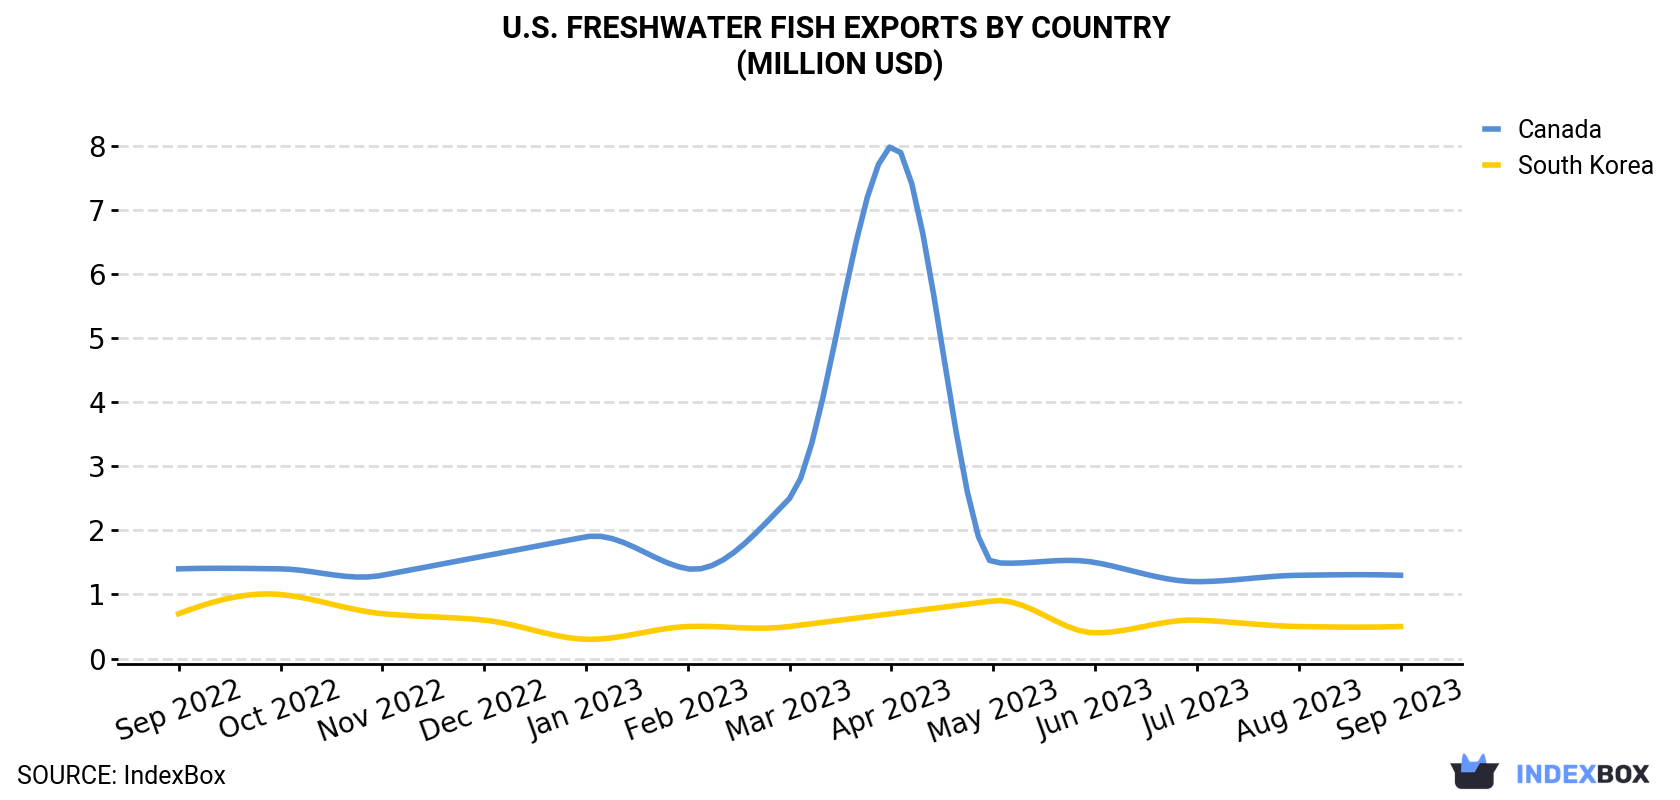 U.S. Freshwater Fish Exports By Country (Million USD)